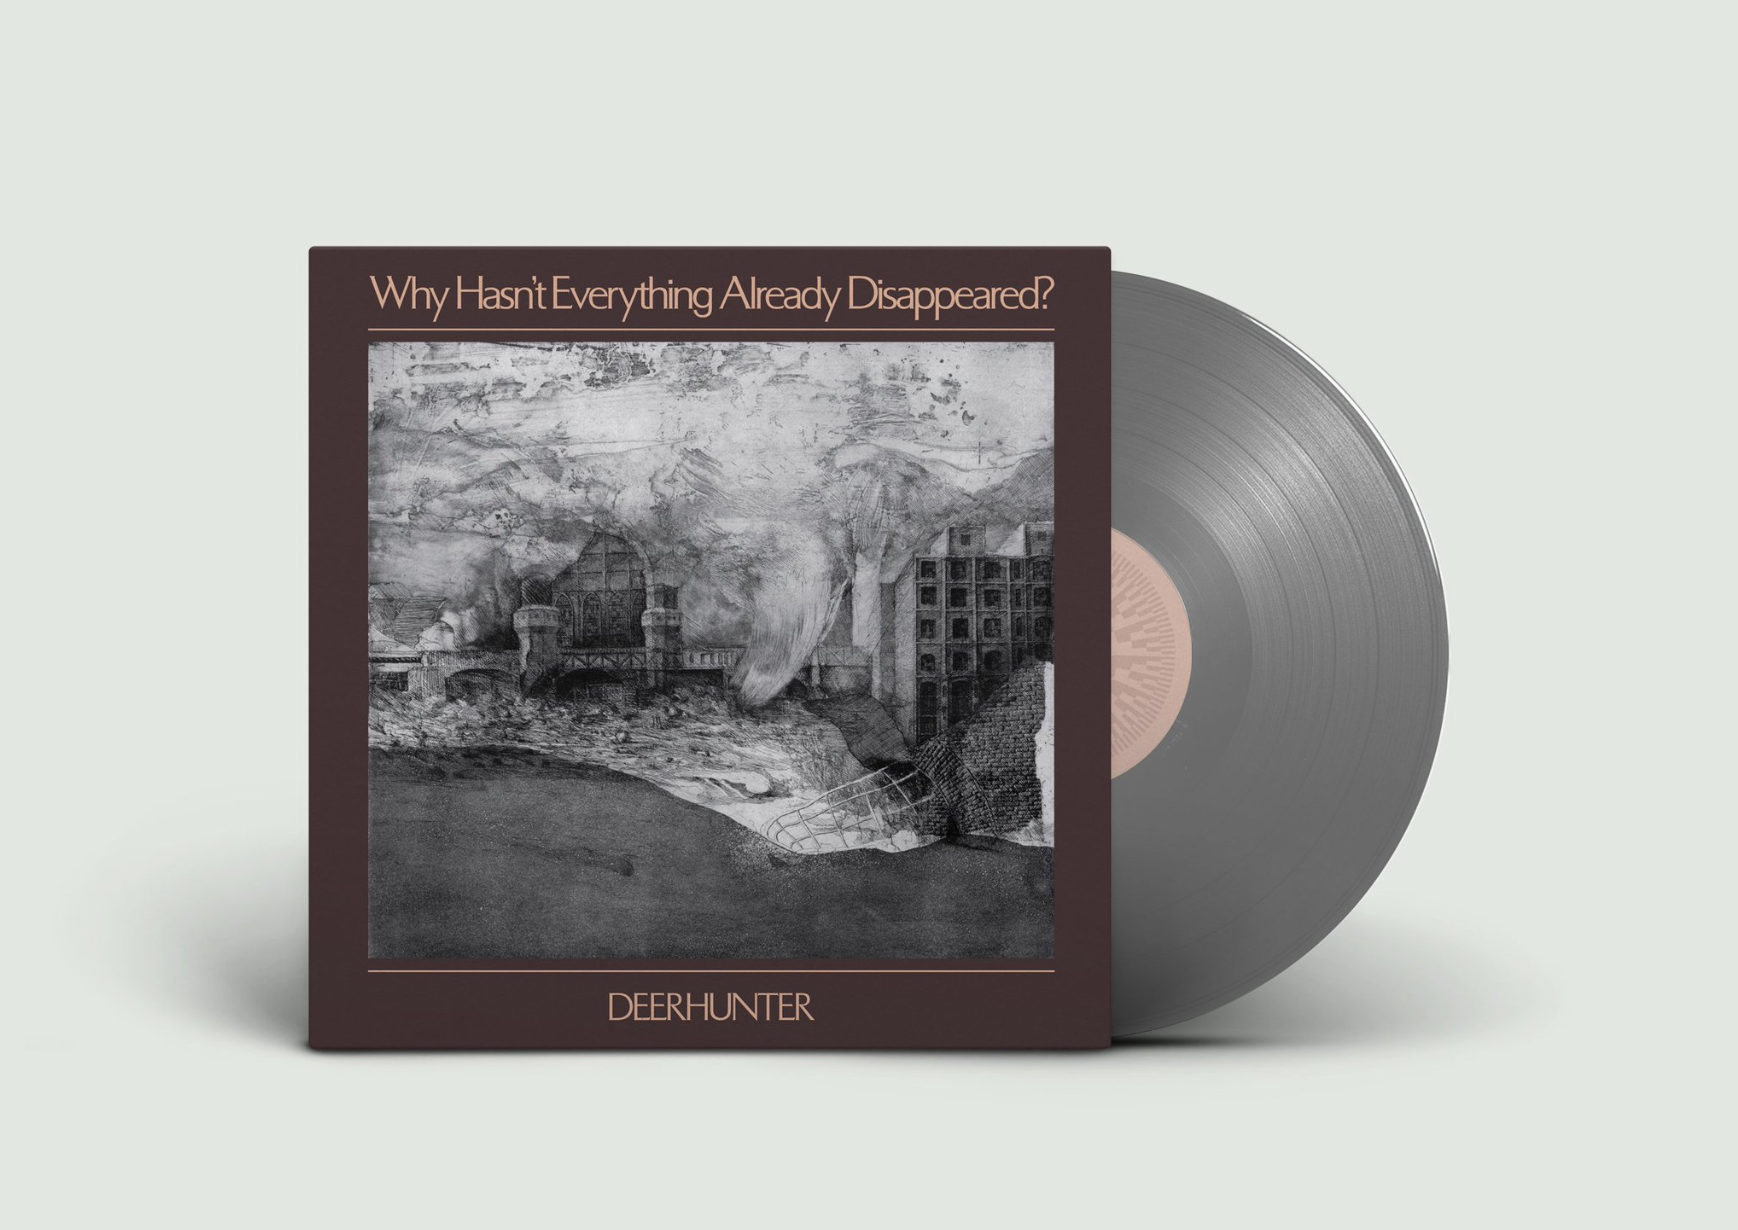 4AD Deerhunter - Why Hasn't Everything Already Disappeared? (Grey Vinyl)